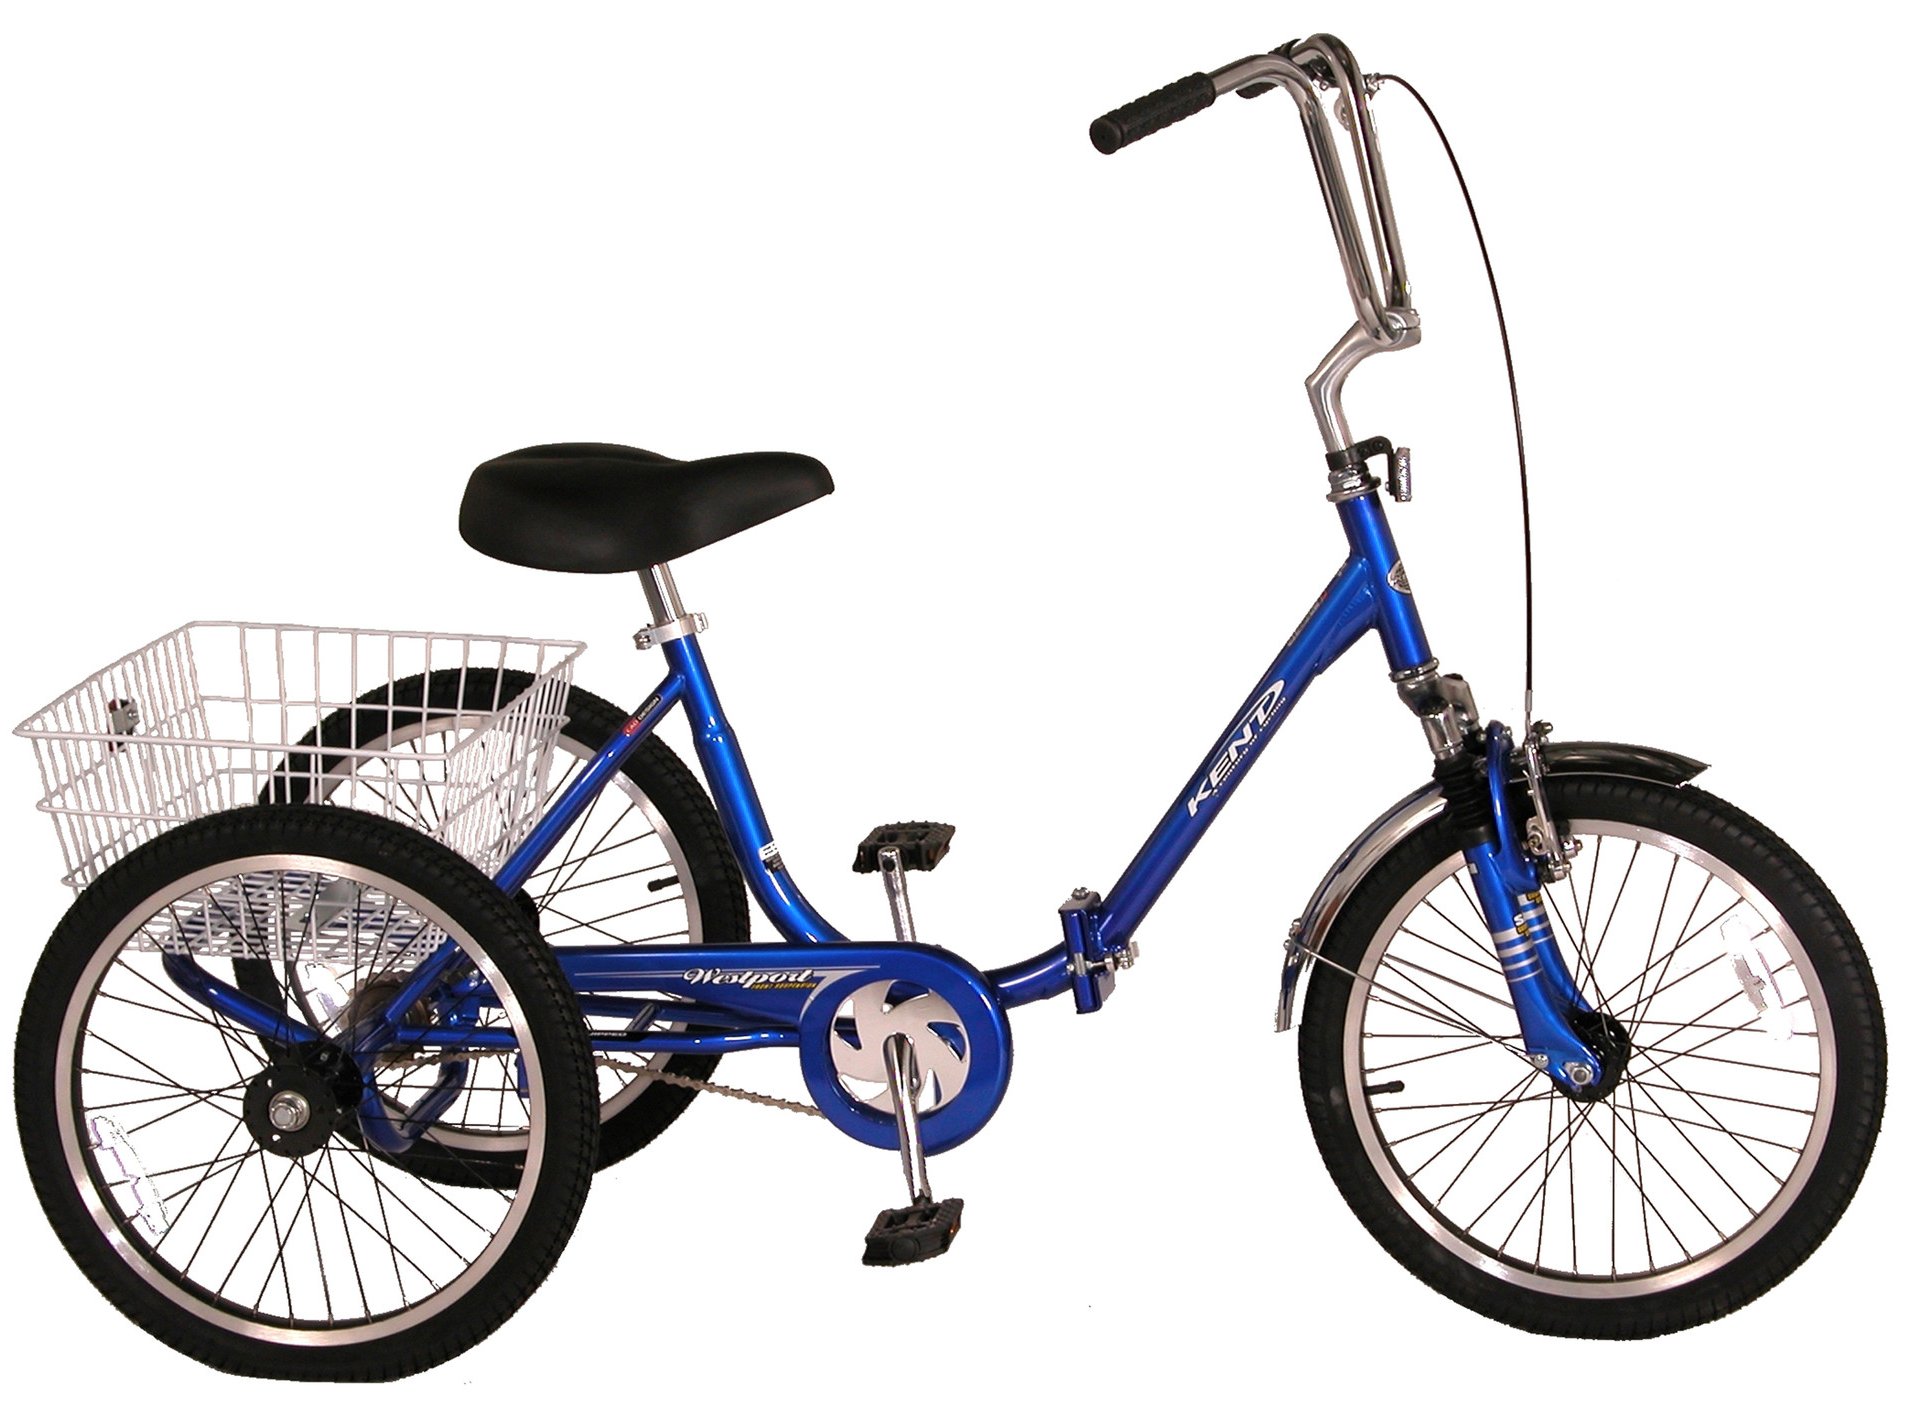 Tricycle Pics, Vehicles Collection